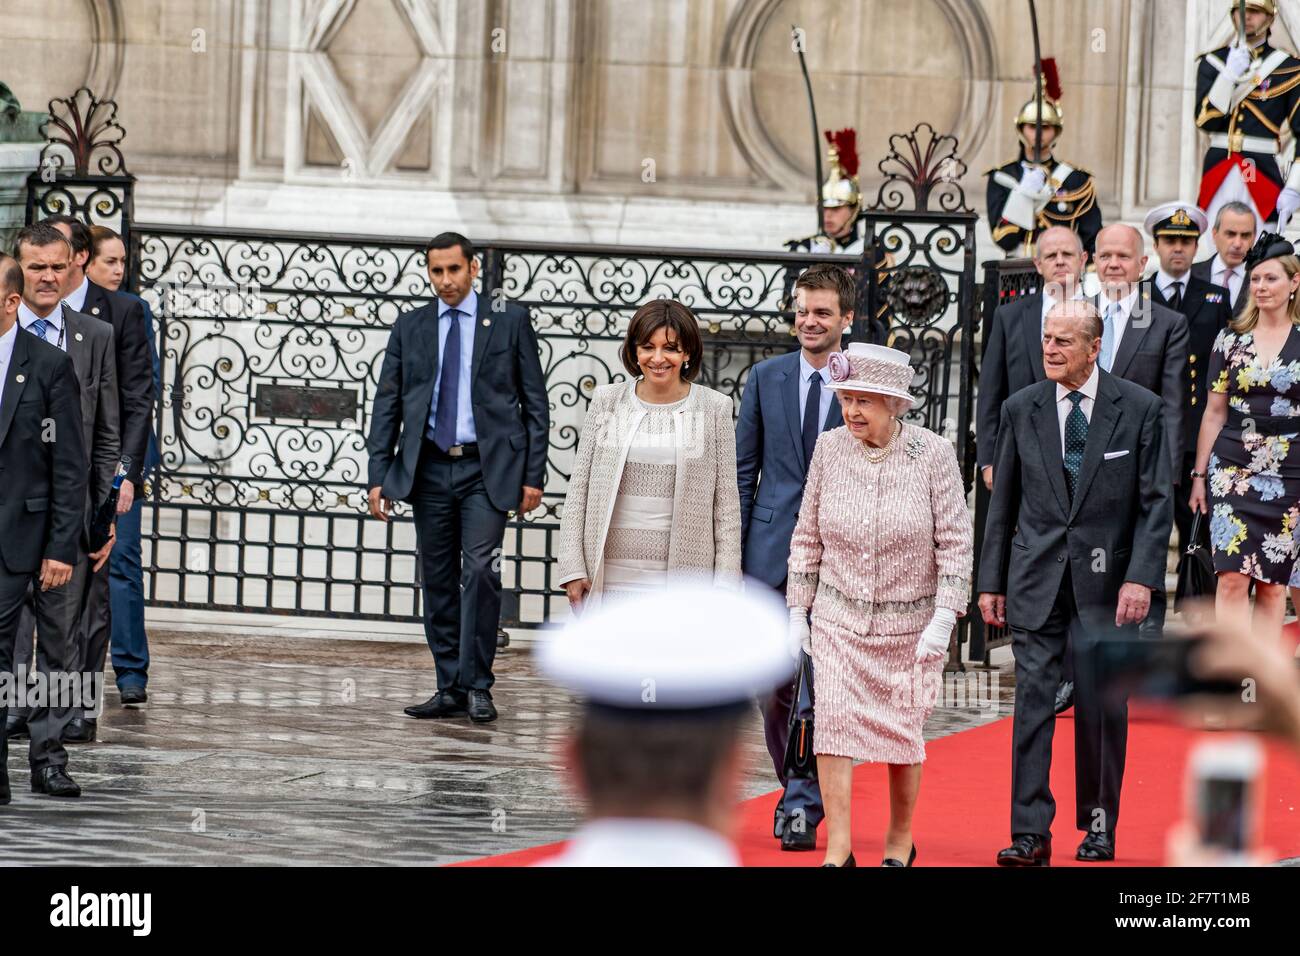 Paris, France. 7th June, 2014. Queen Elizabeth II accompanied by Prince Philip is the host of the City of Paris for the last day of her state visit. Stock Photo